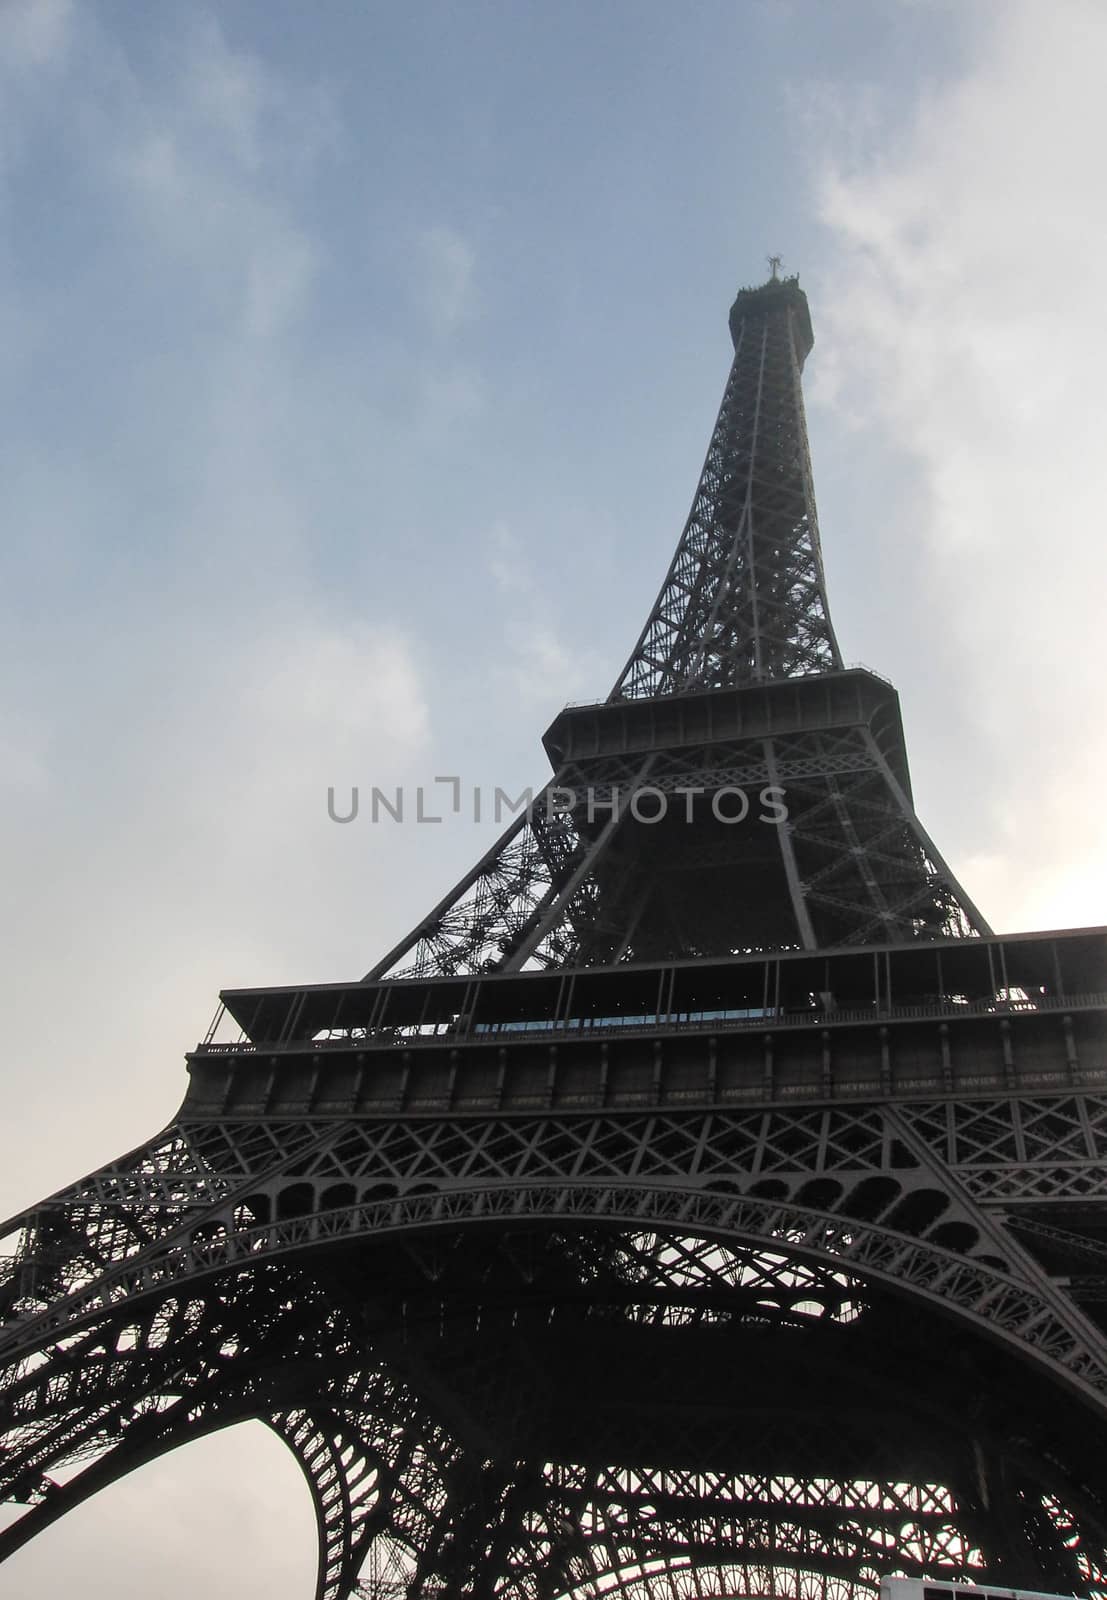 Closeup picture of the Eiffel Tower.